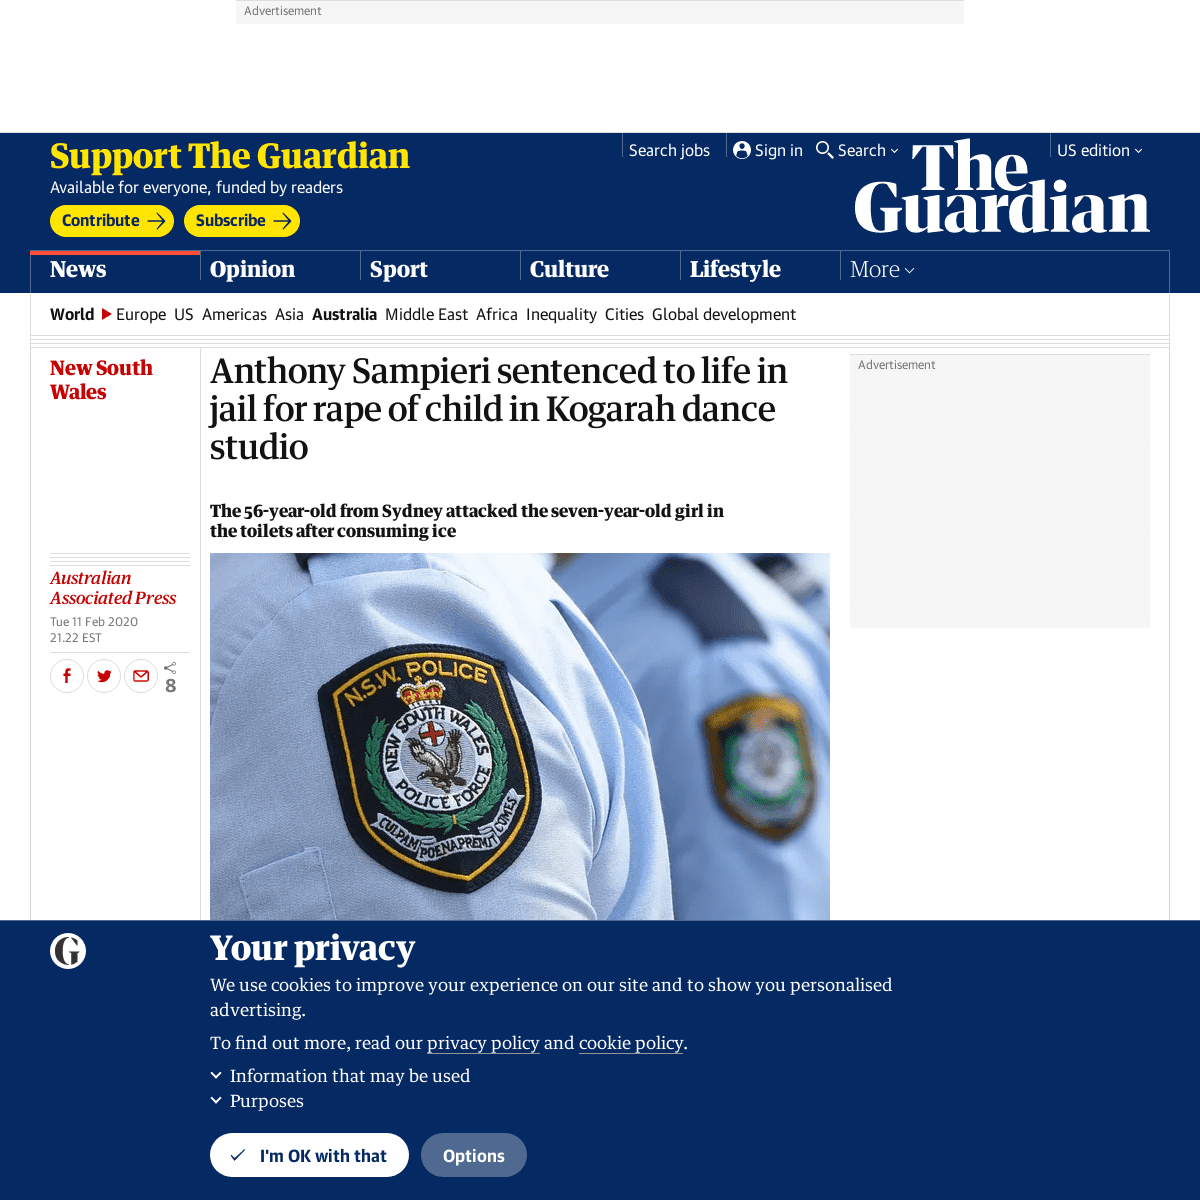 A complete backup of www.theguardian.com/australia-news/2020/feb/12/anthony-sampieri-sentenced-to-life-in-jail-for-of-child-in-k